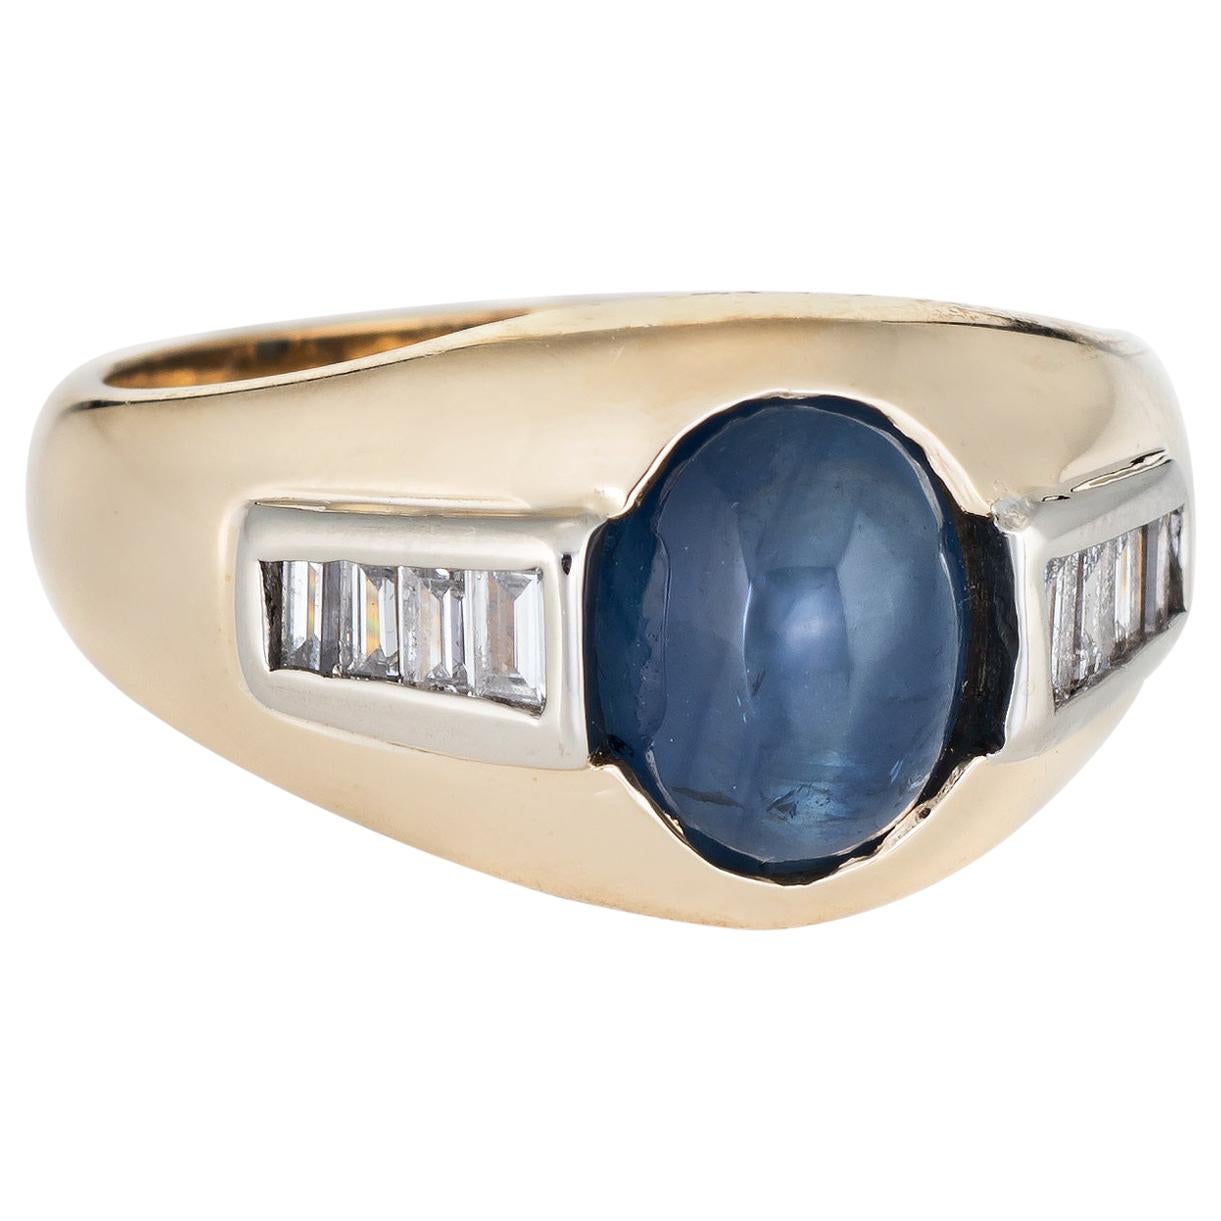 A 9K yellow gold 8 blue sapphire cabachon ring. Gold sapphire ring